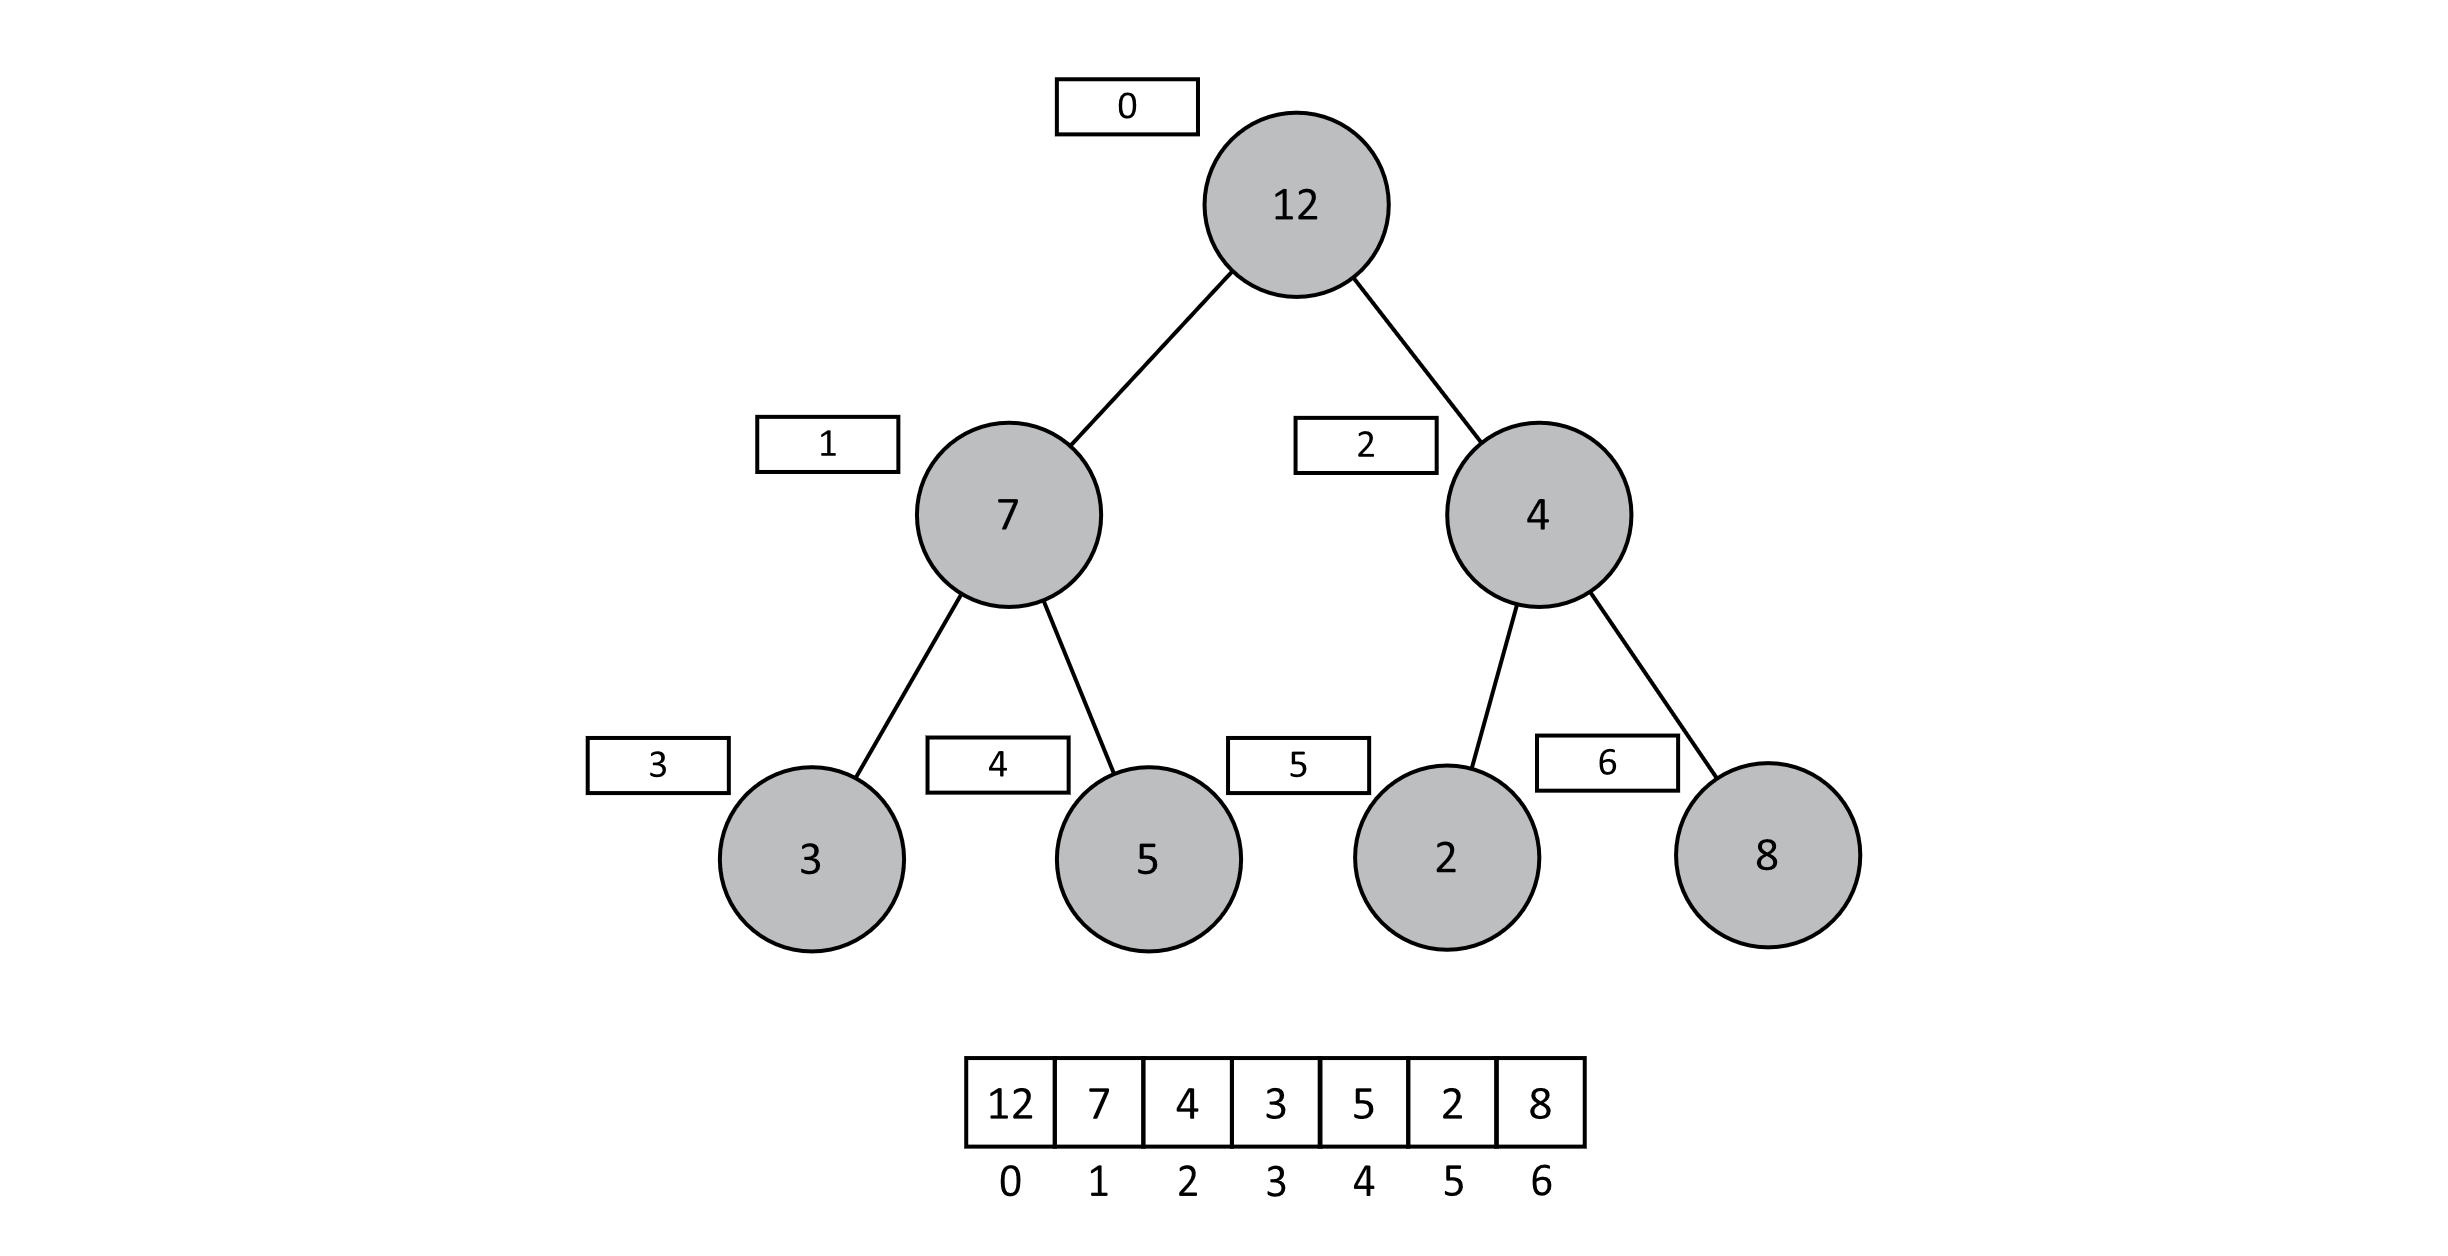 The same heap as the previous figure with an 8 added to the end position. This position is incorrect according to heap ordering.